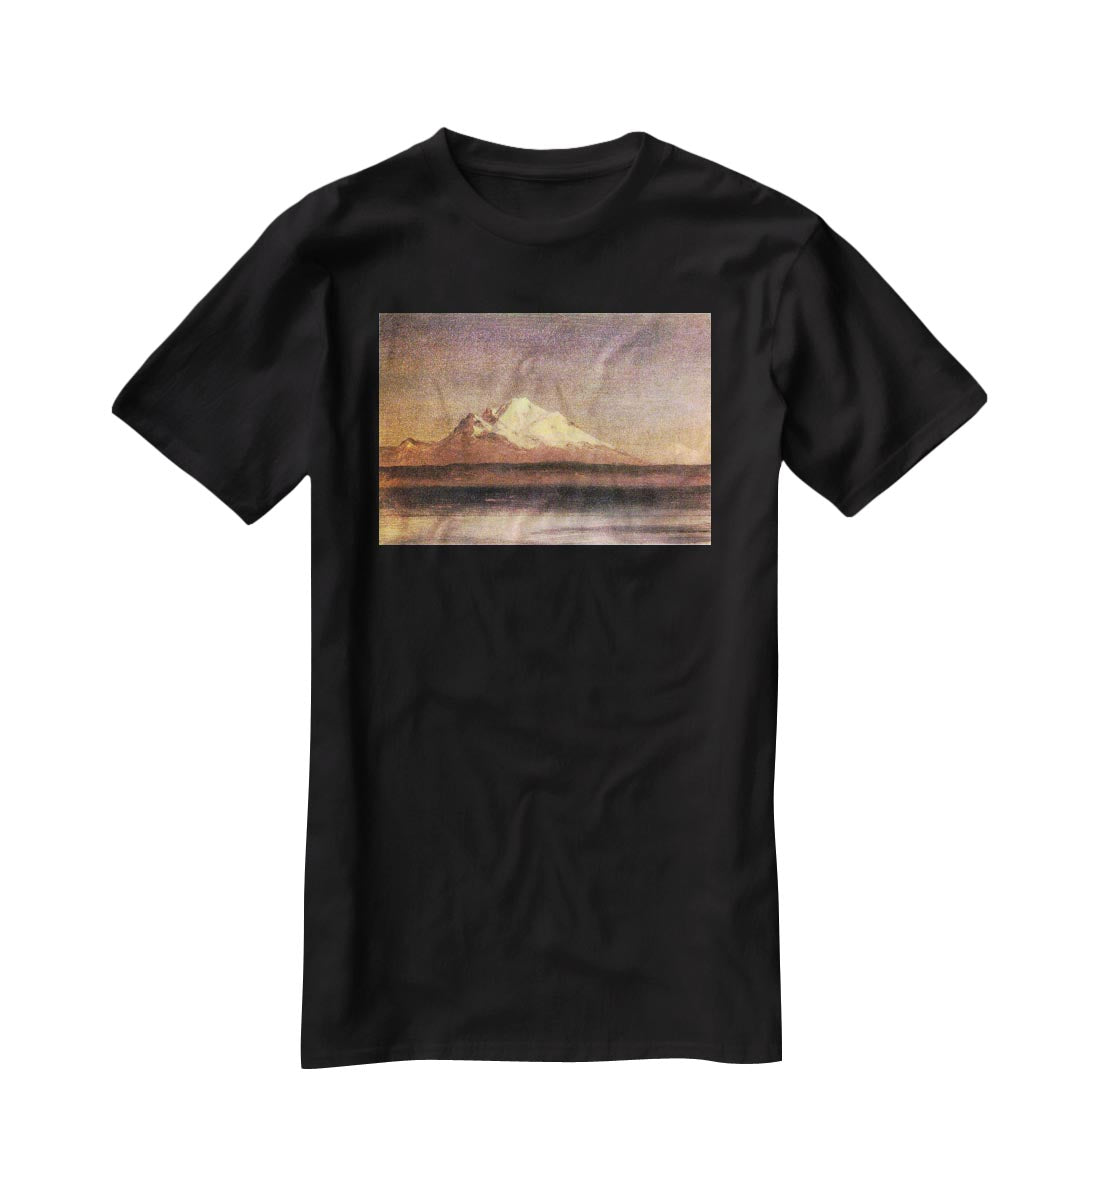 Snowy Mountains in the Pacific Northwest 2 by Bierstadt T-Shirt - Canvas Art Rocks - 1